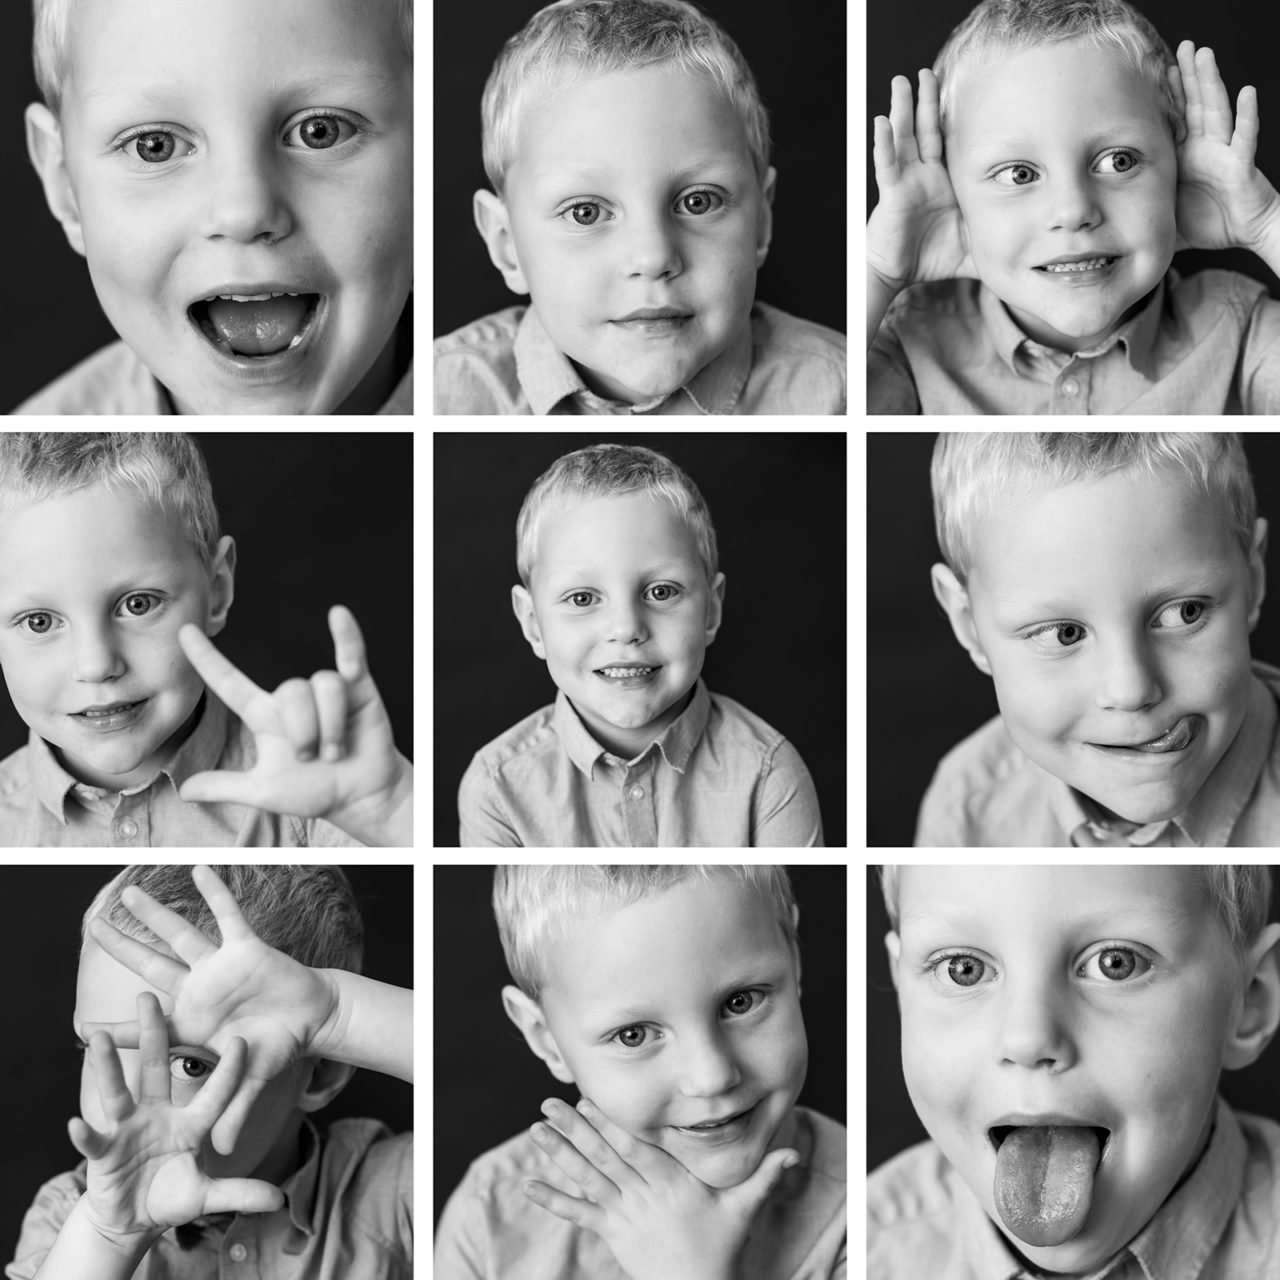 Black & White mini session photos of a young boy arranged in a grid to showcase his personality by Paper Bunny Studios